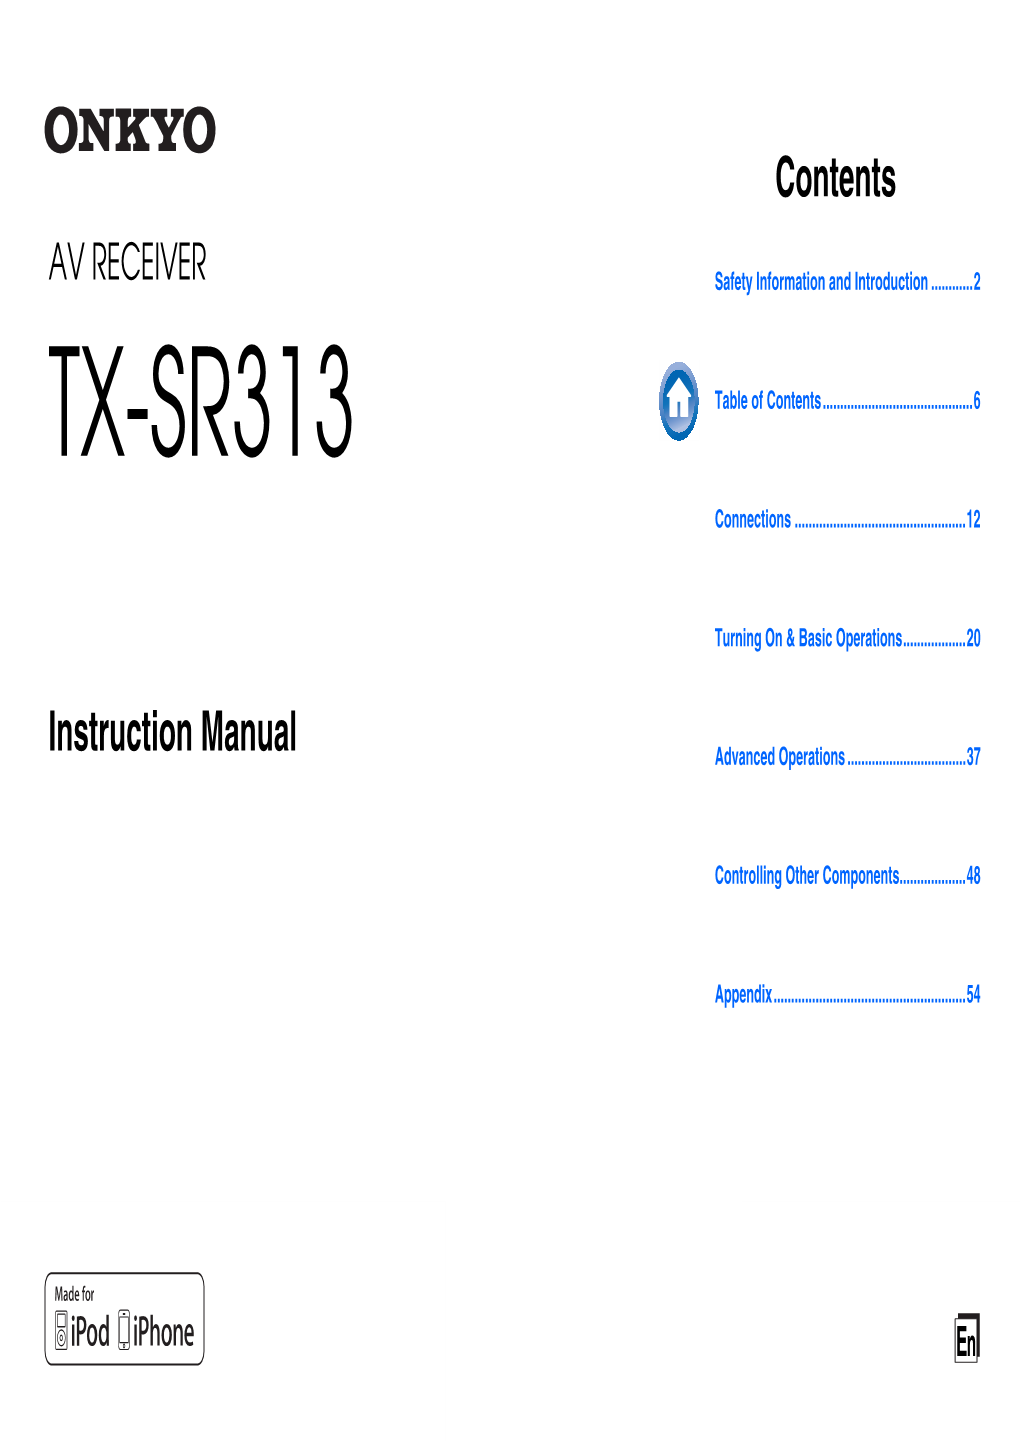 TX-SR313 Table of Contents